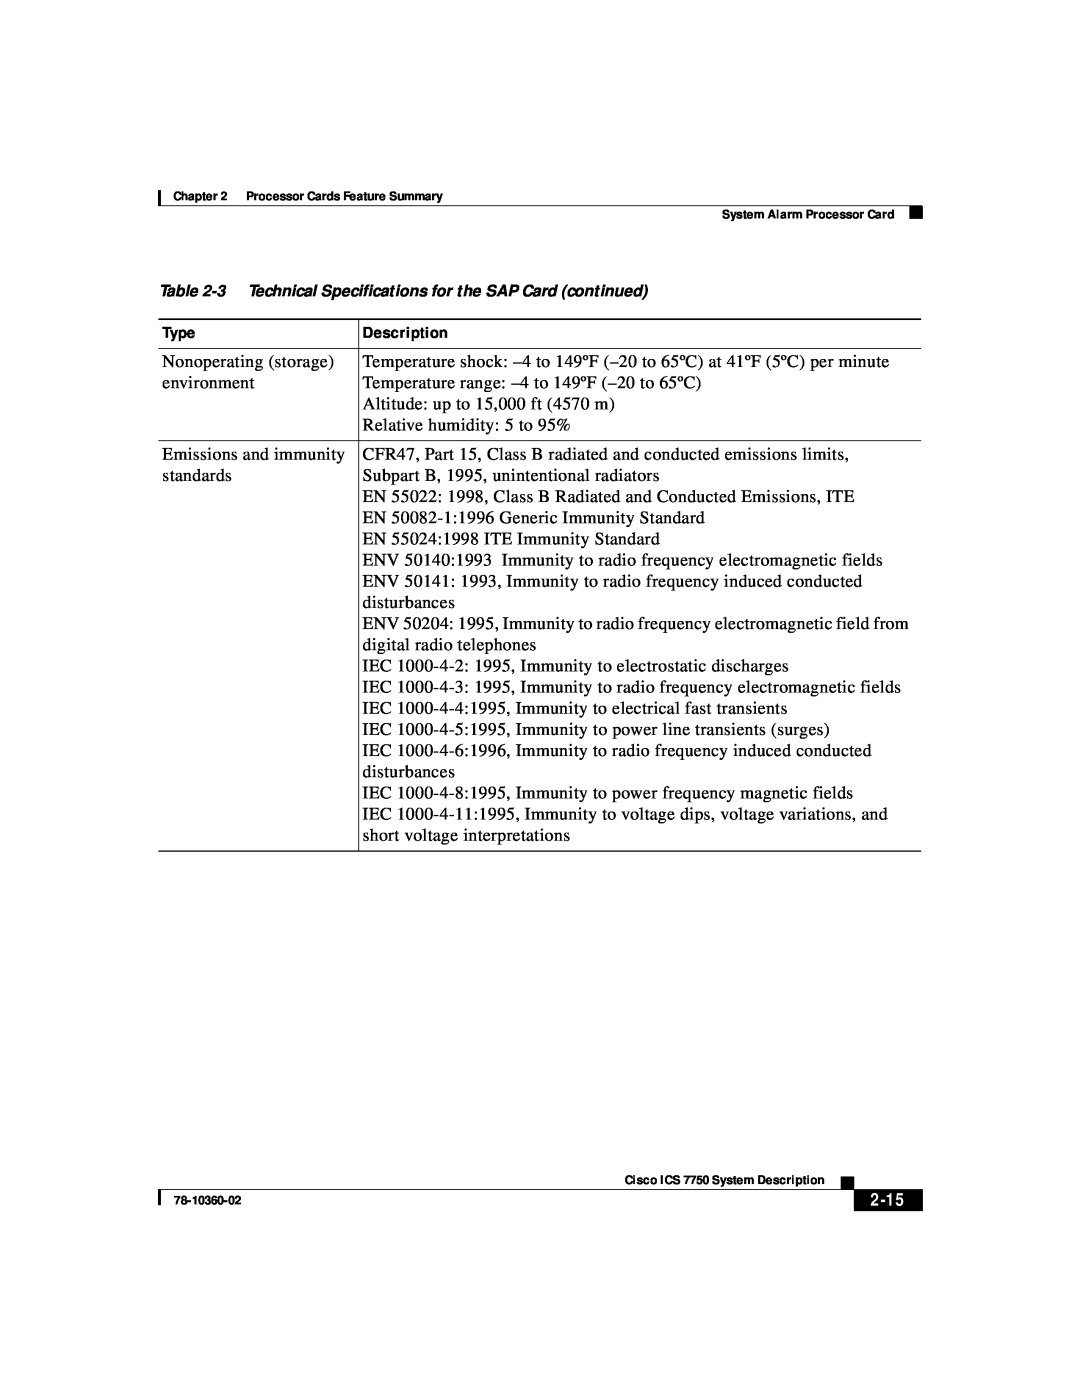 Cisco Systems ICS-7750 manual Type, Description, 2-15, 3 Technical Specifications for the SAP Card continued 